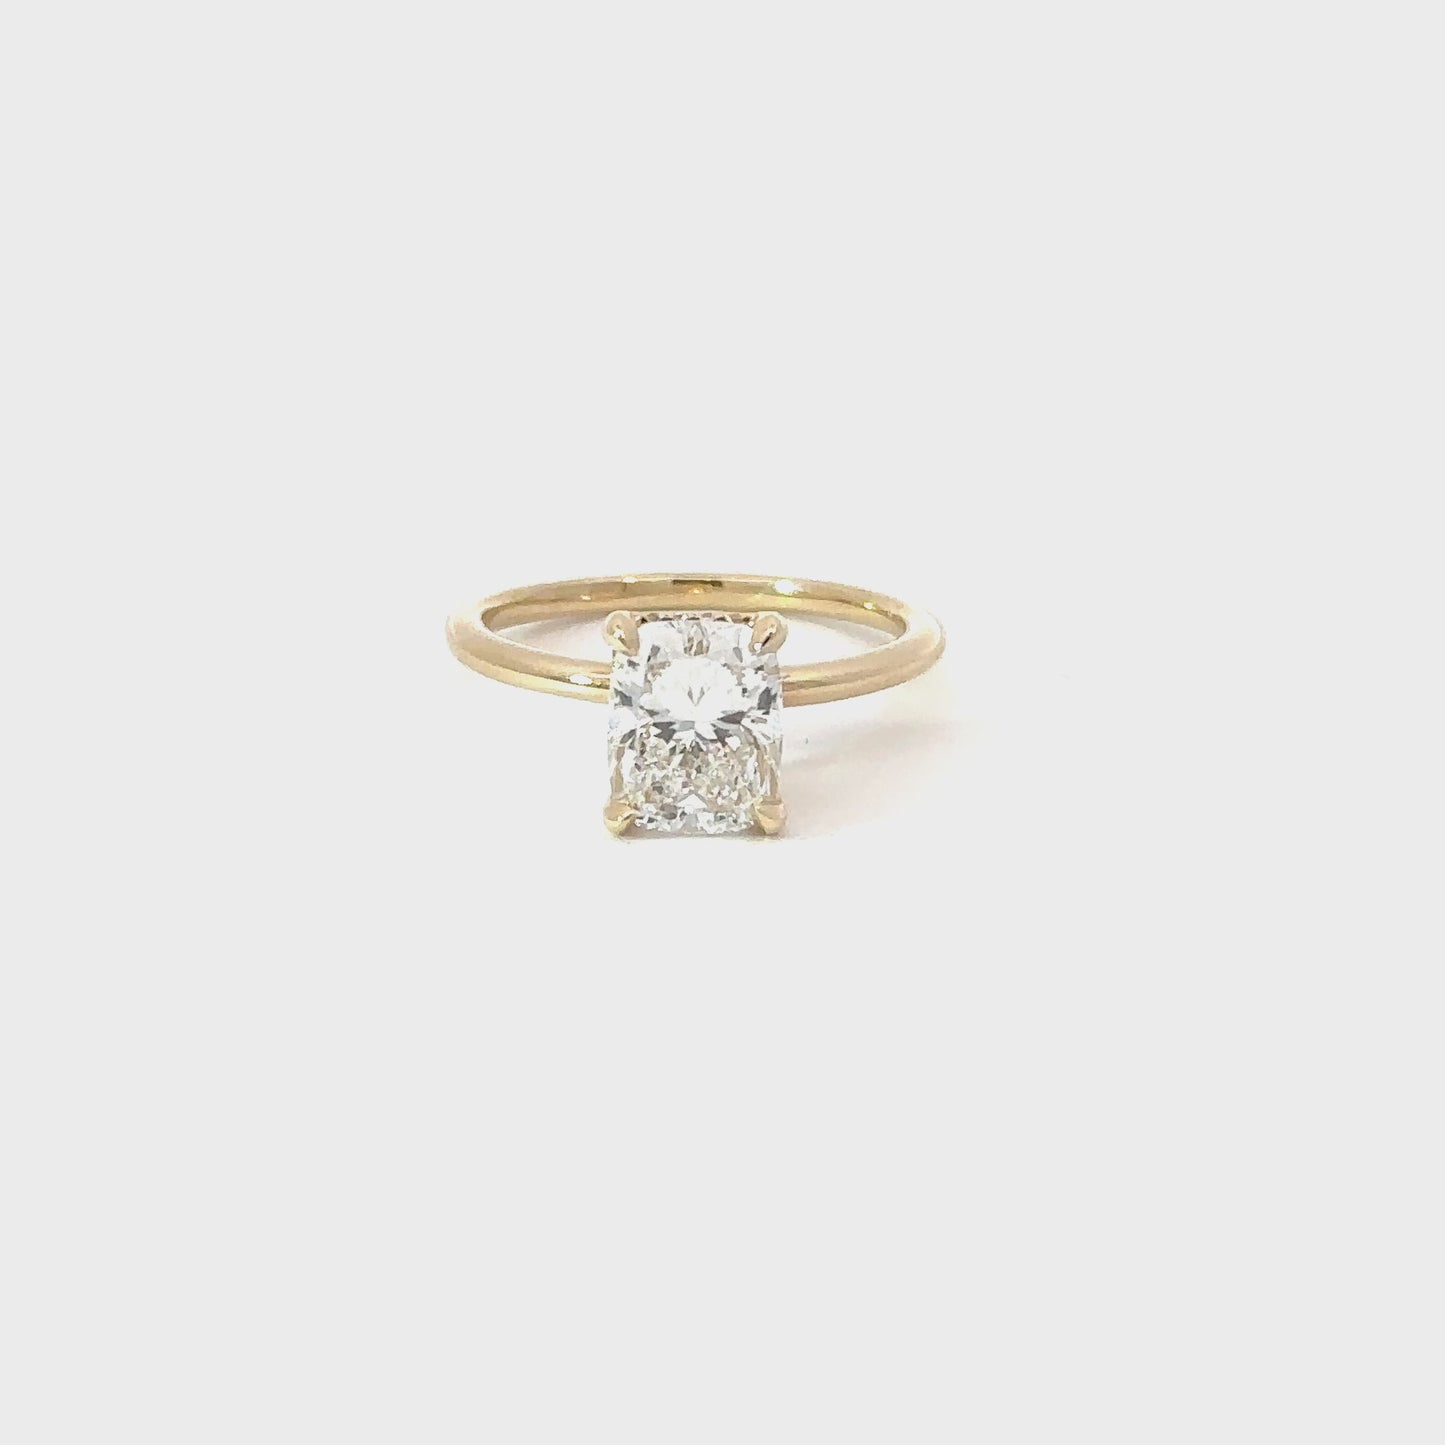 2.20 Carat Cushion Lab Grown Diamond Engagement Ring with Hidden Halo | Engagement Ring Wednesday